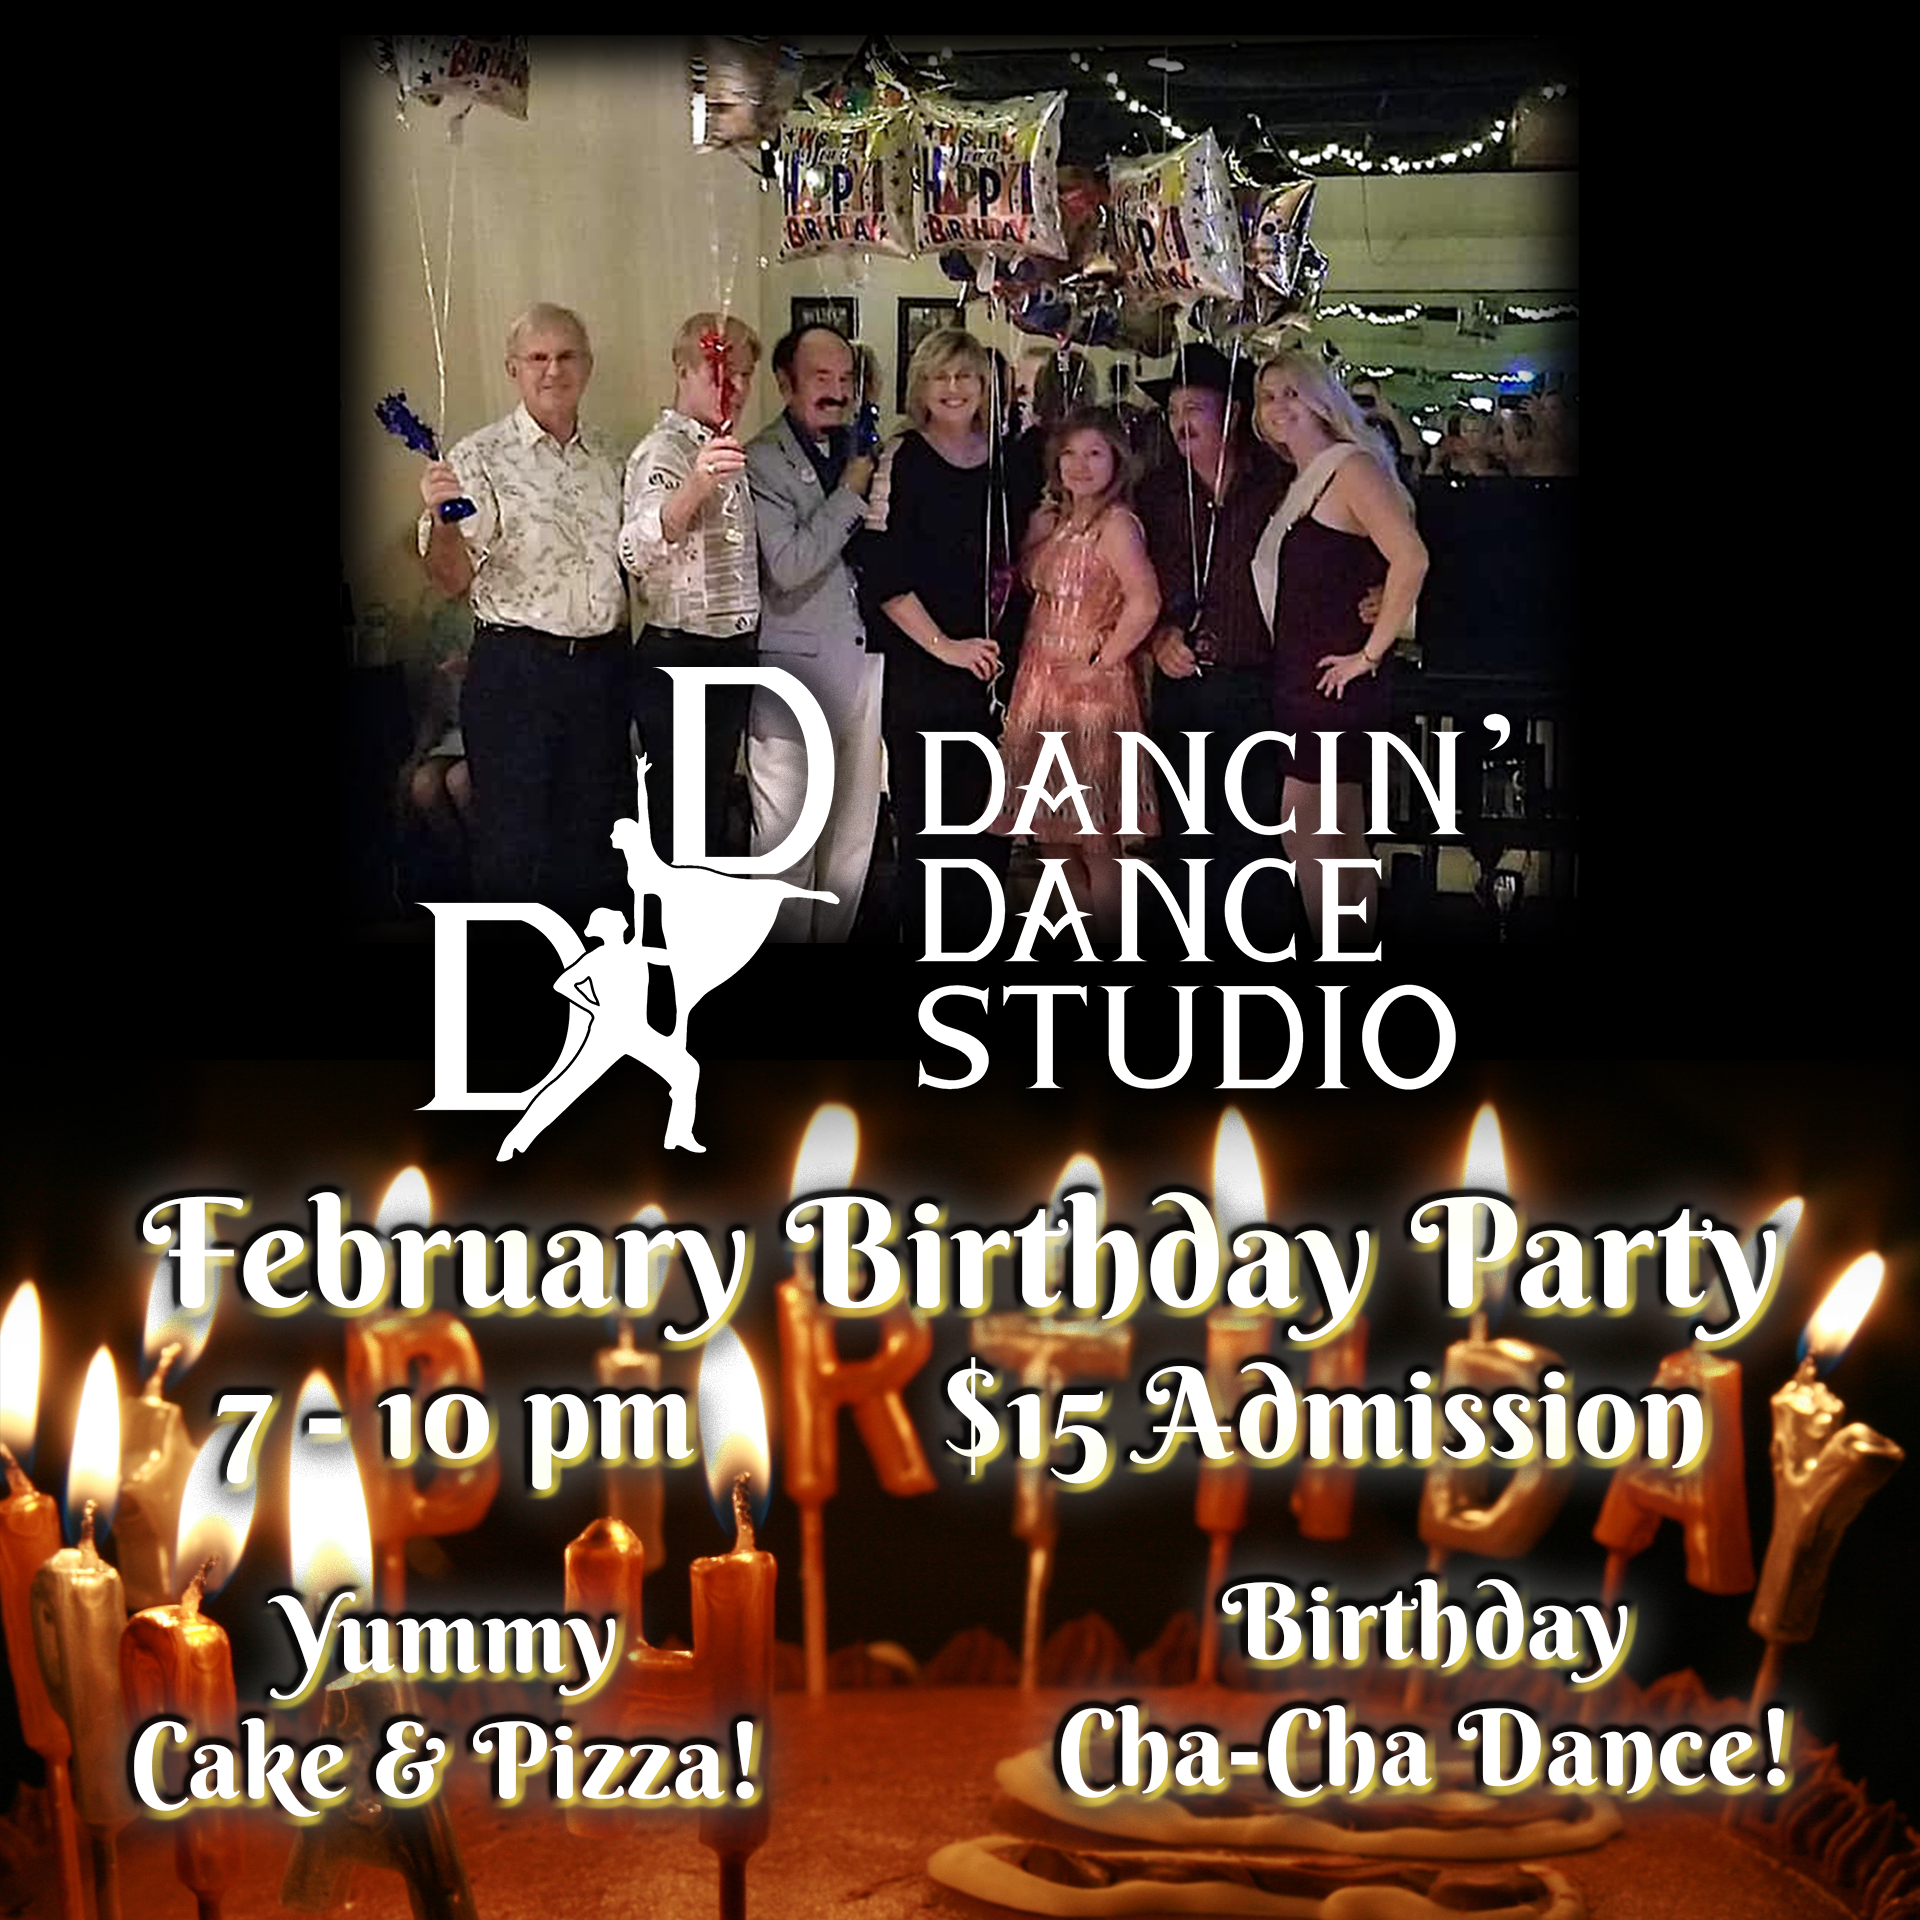 february bday party ad